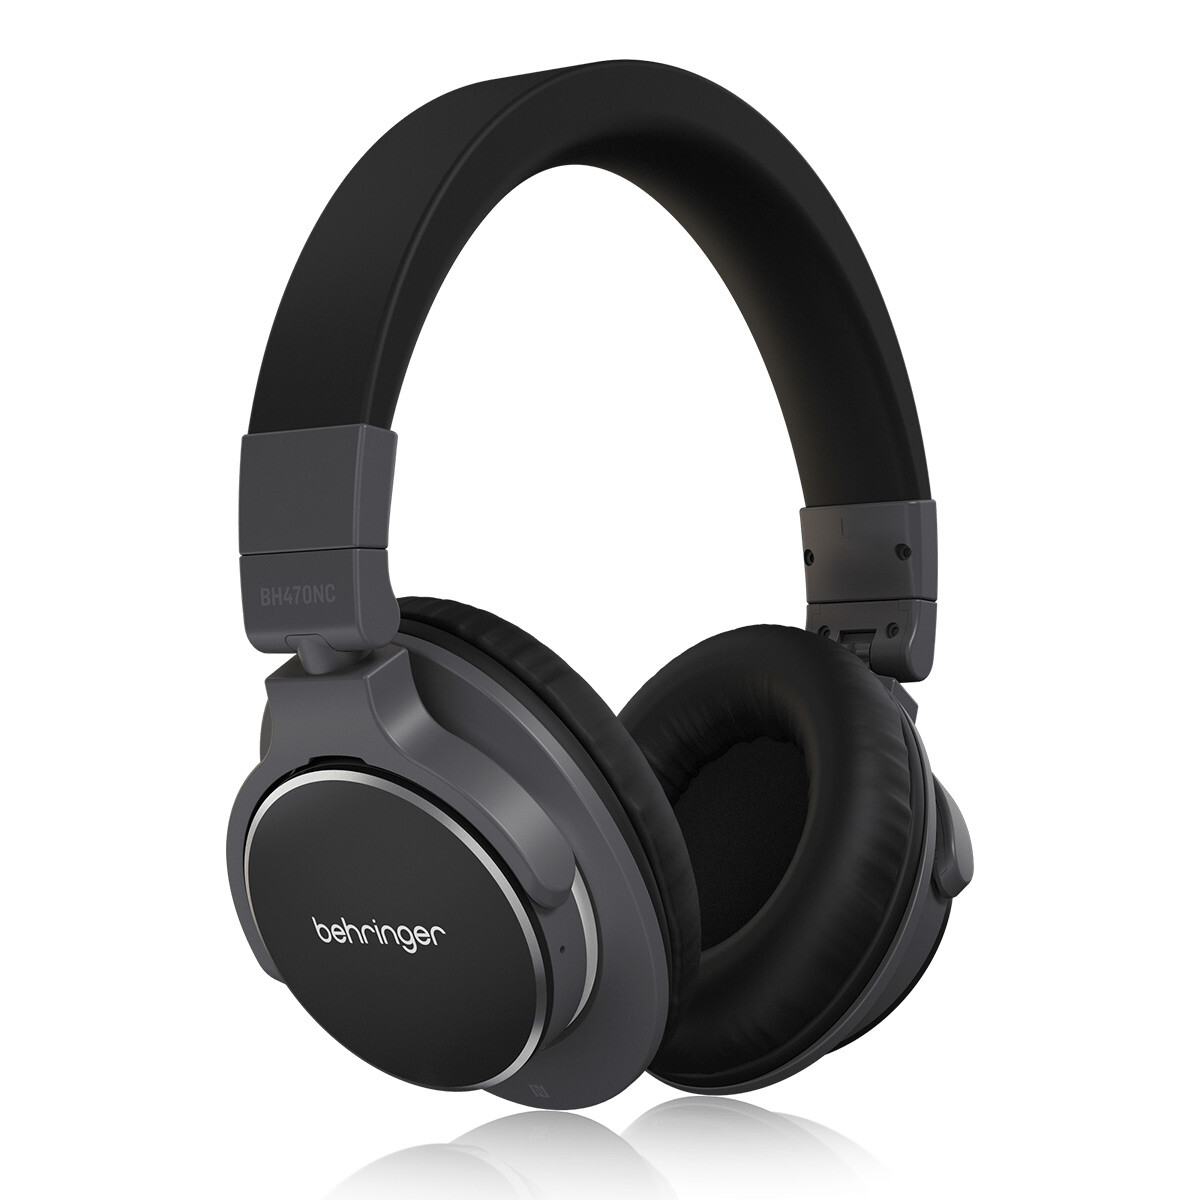 Auricular Behringer Bh470nc Active Noise Canceling 